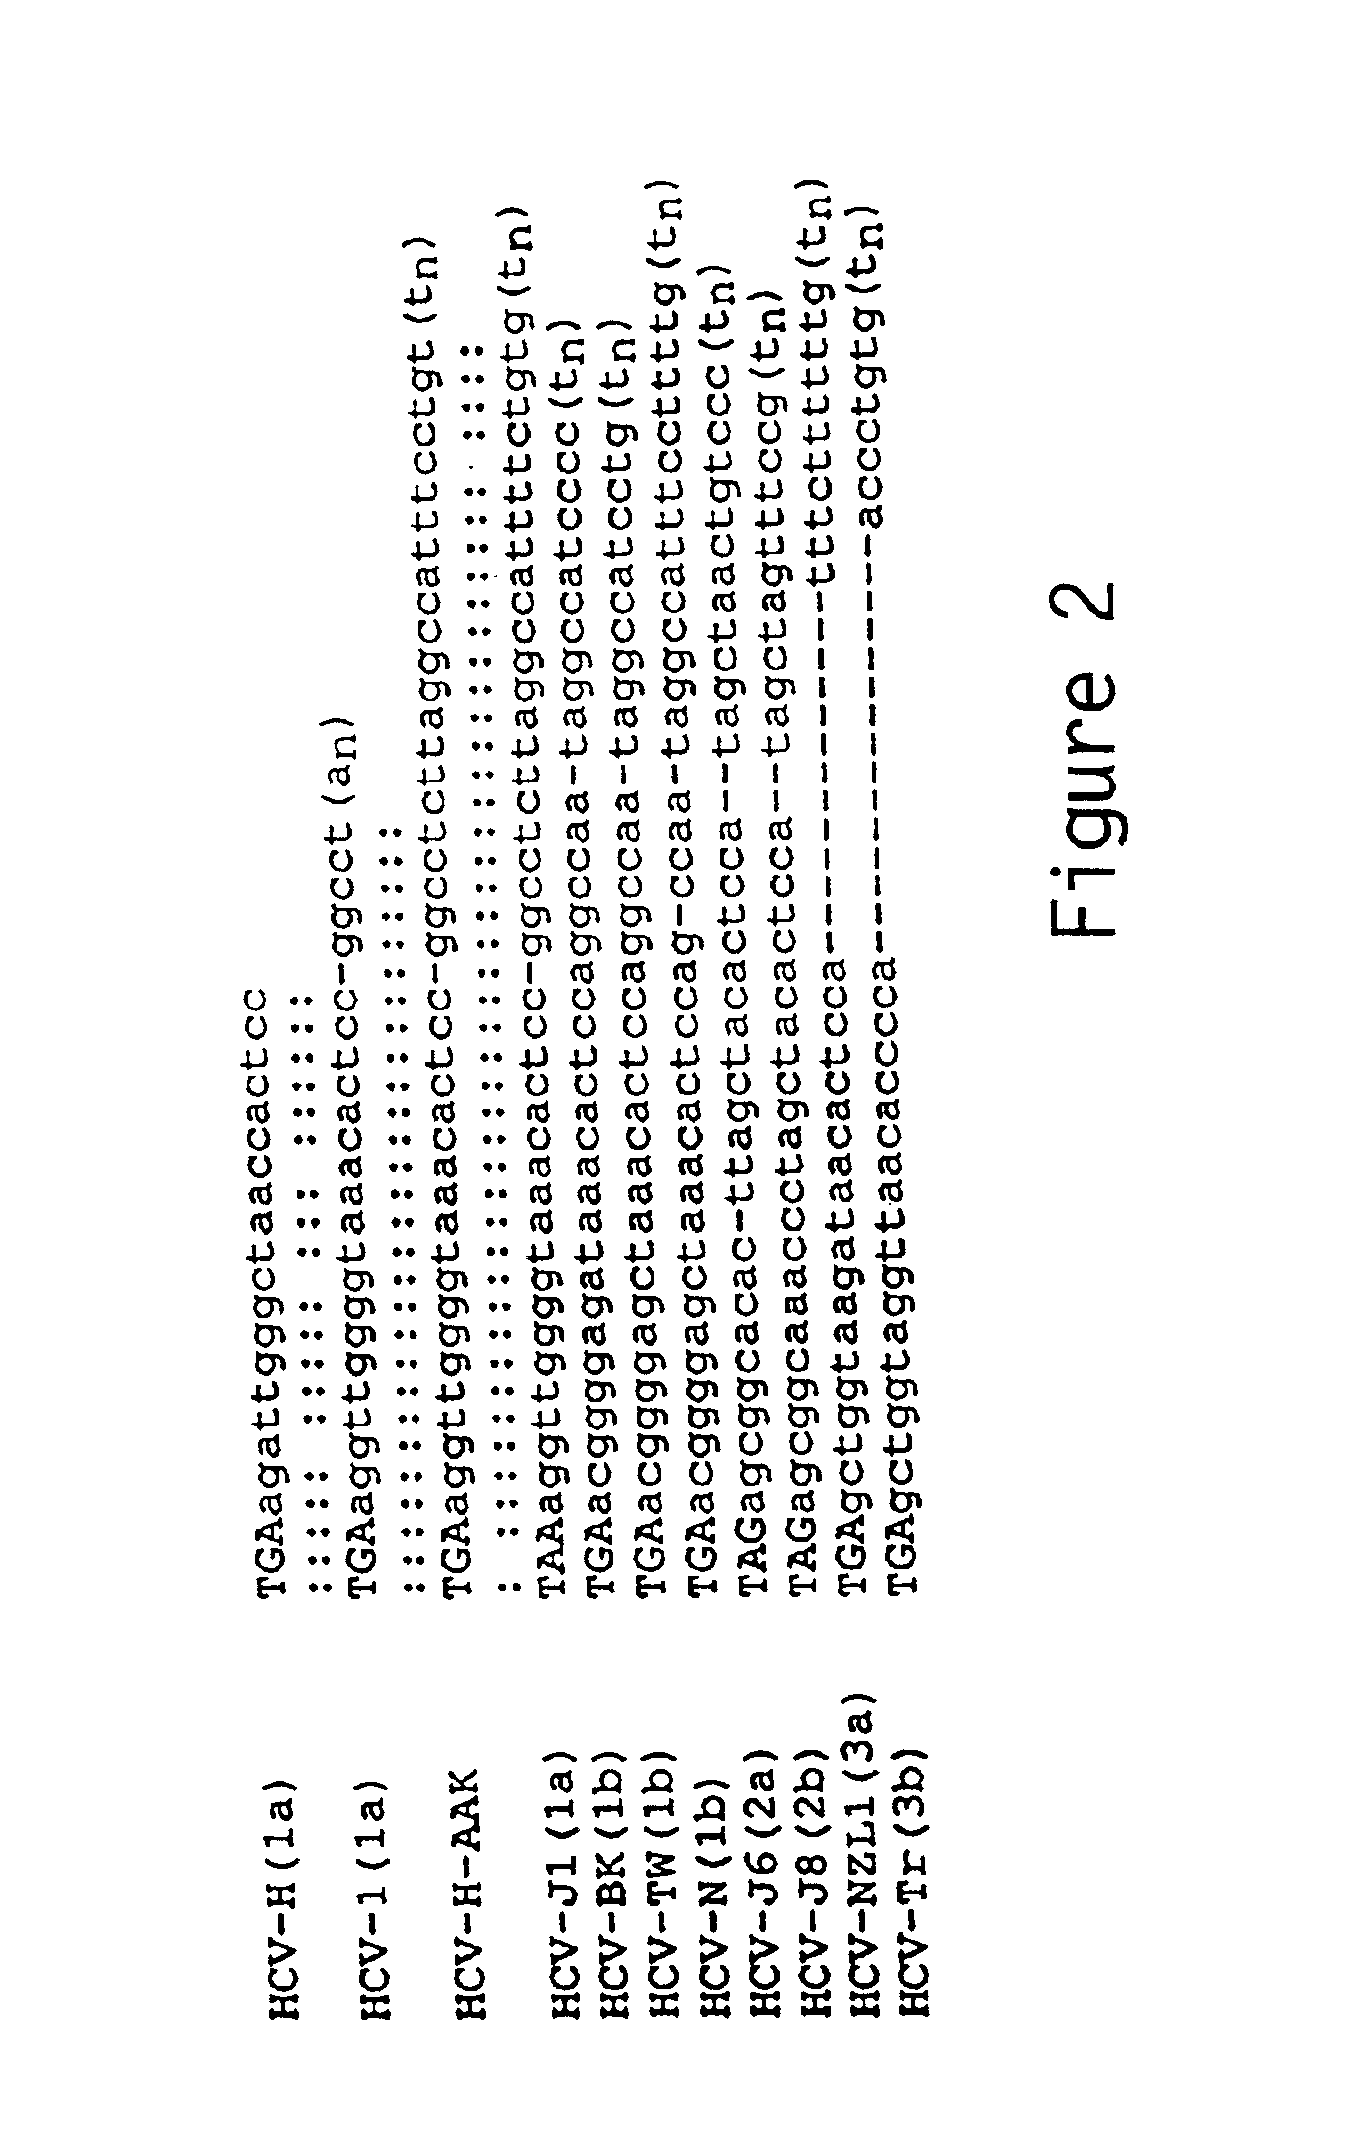 3′terminal sequence of hepatitis C virus genome and diagnostic and therapeutic uses thereof